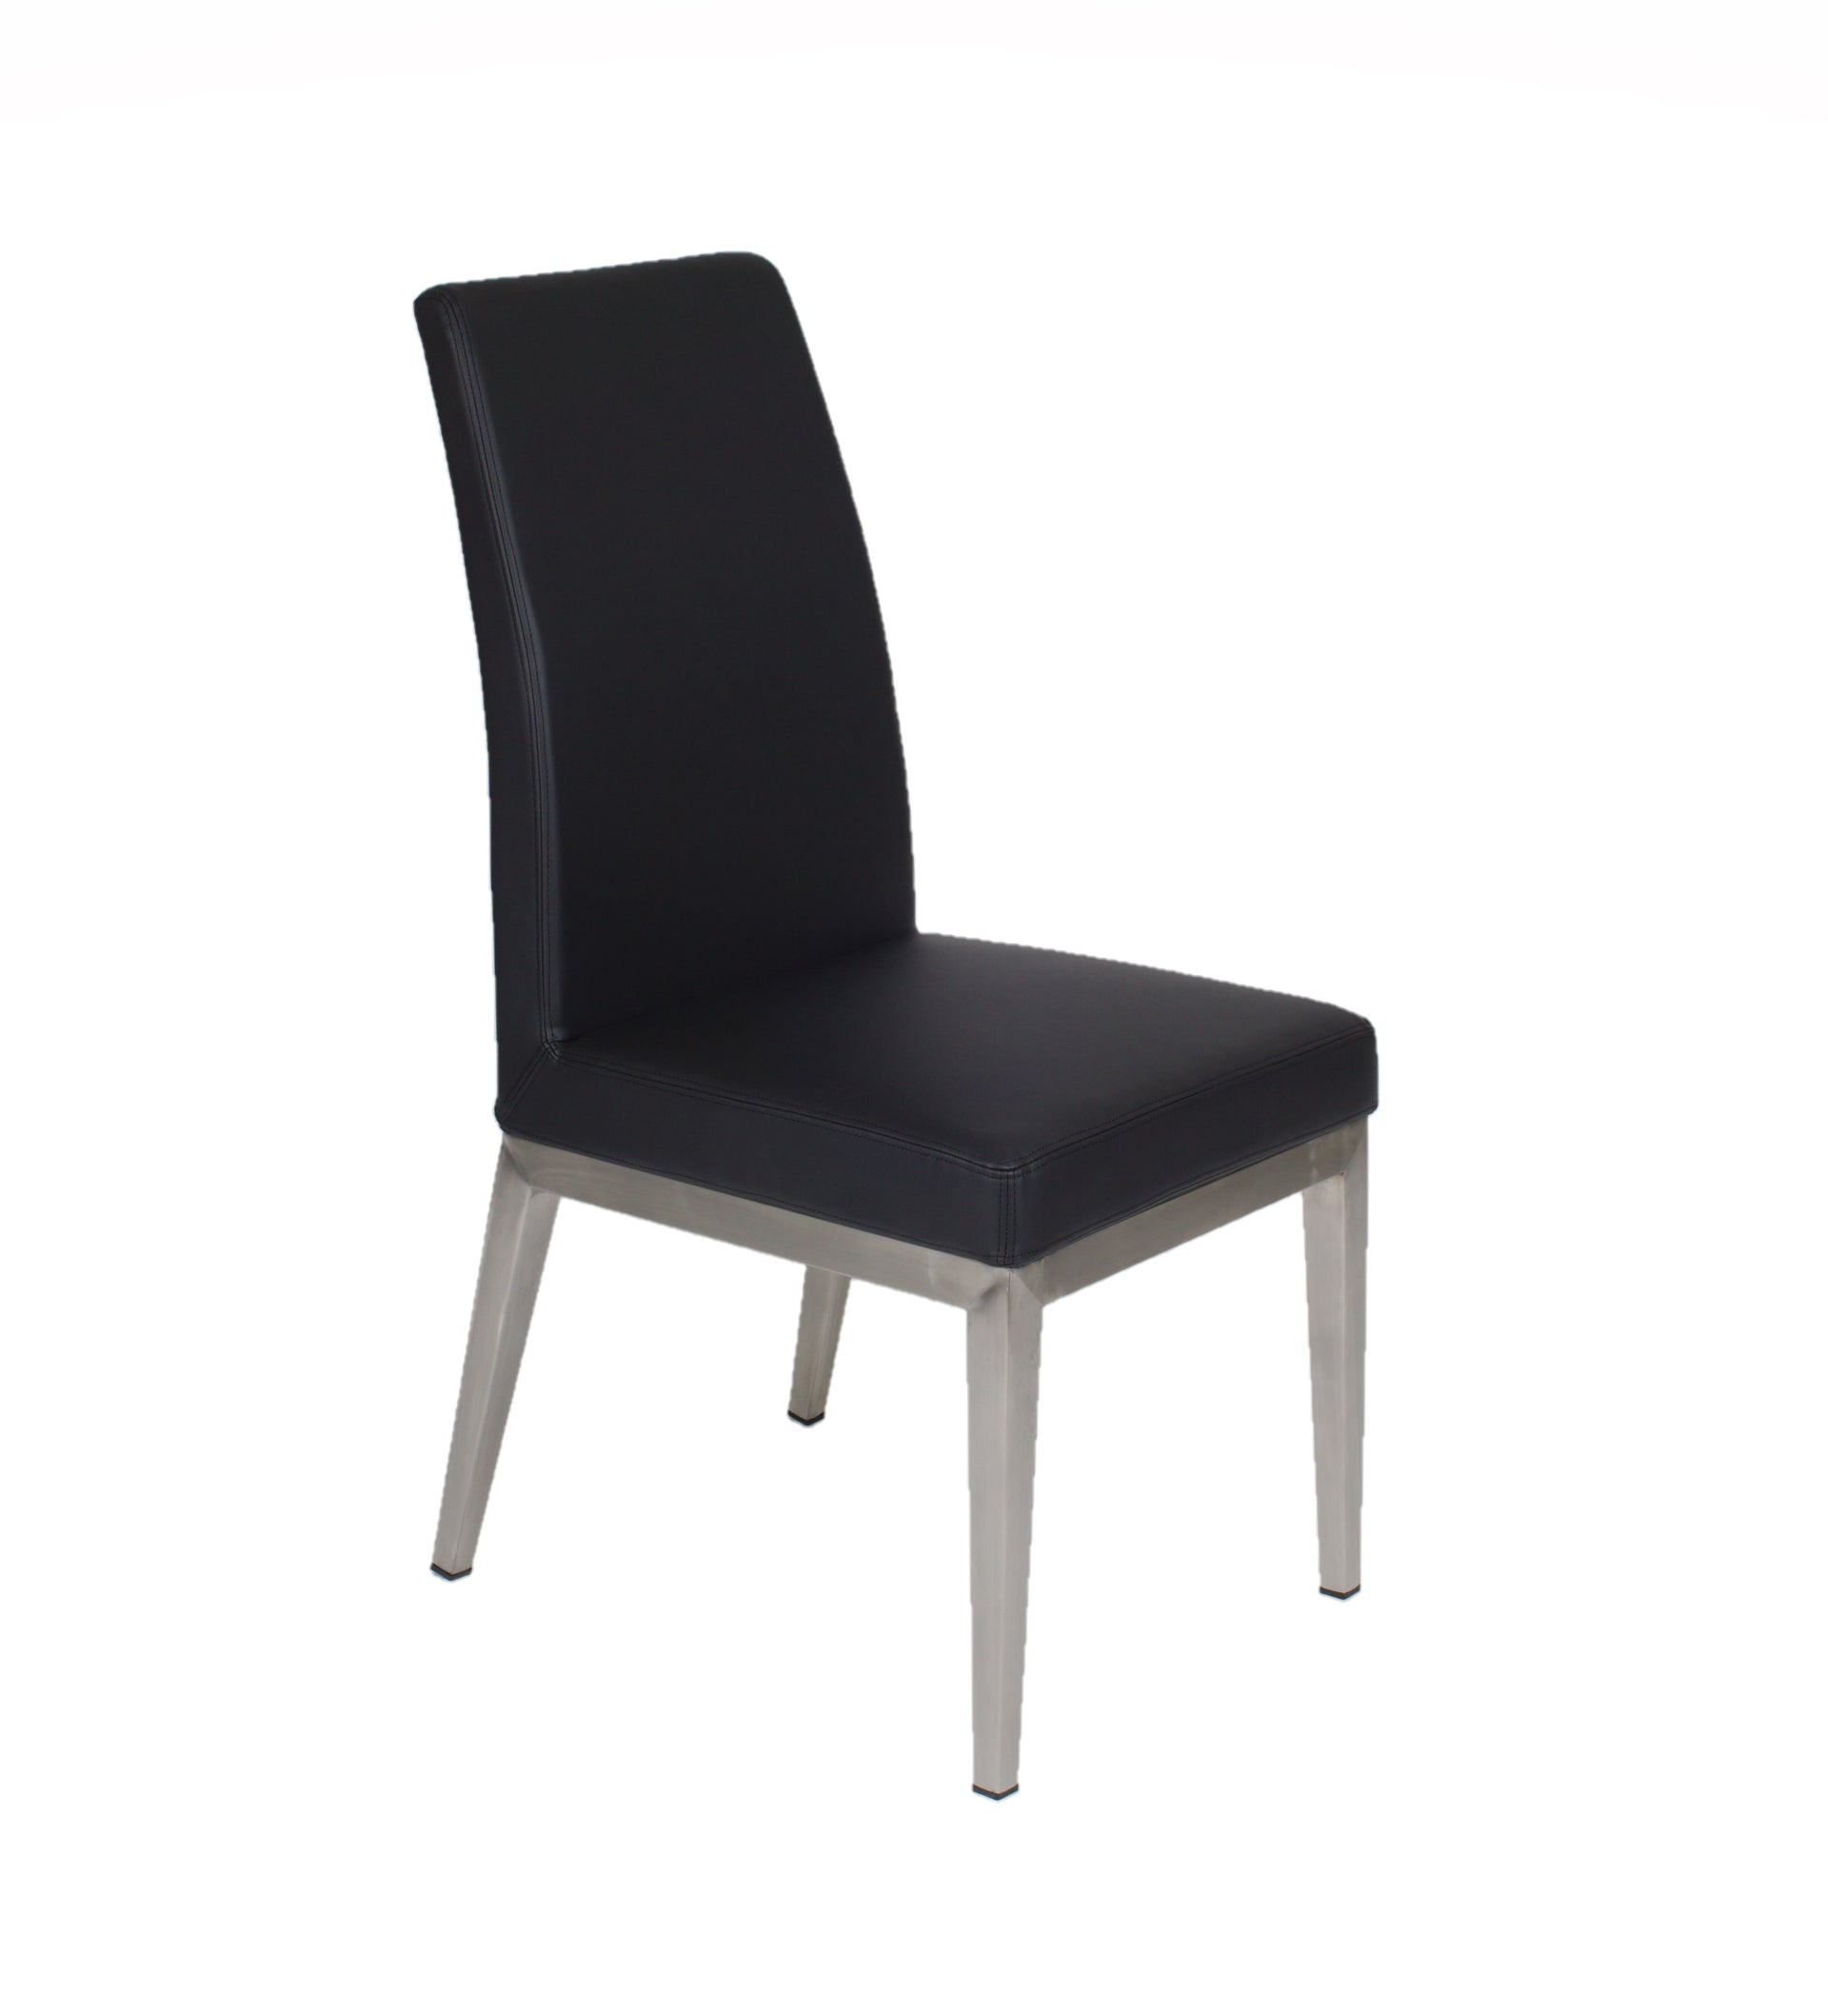 Chairs Canada - Custom Canadian Chairs and Stools Shipped to your Door